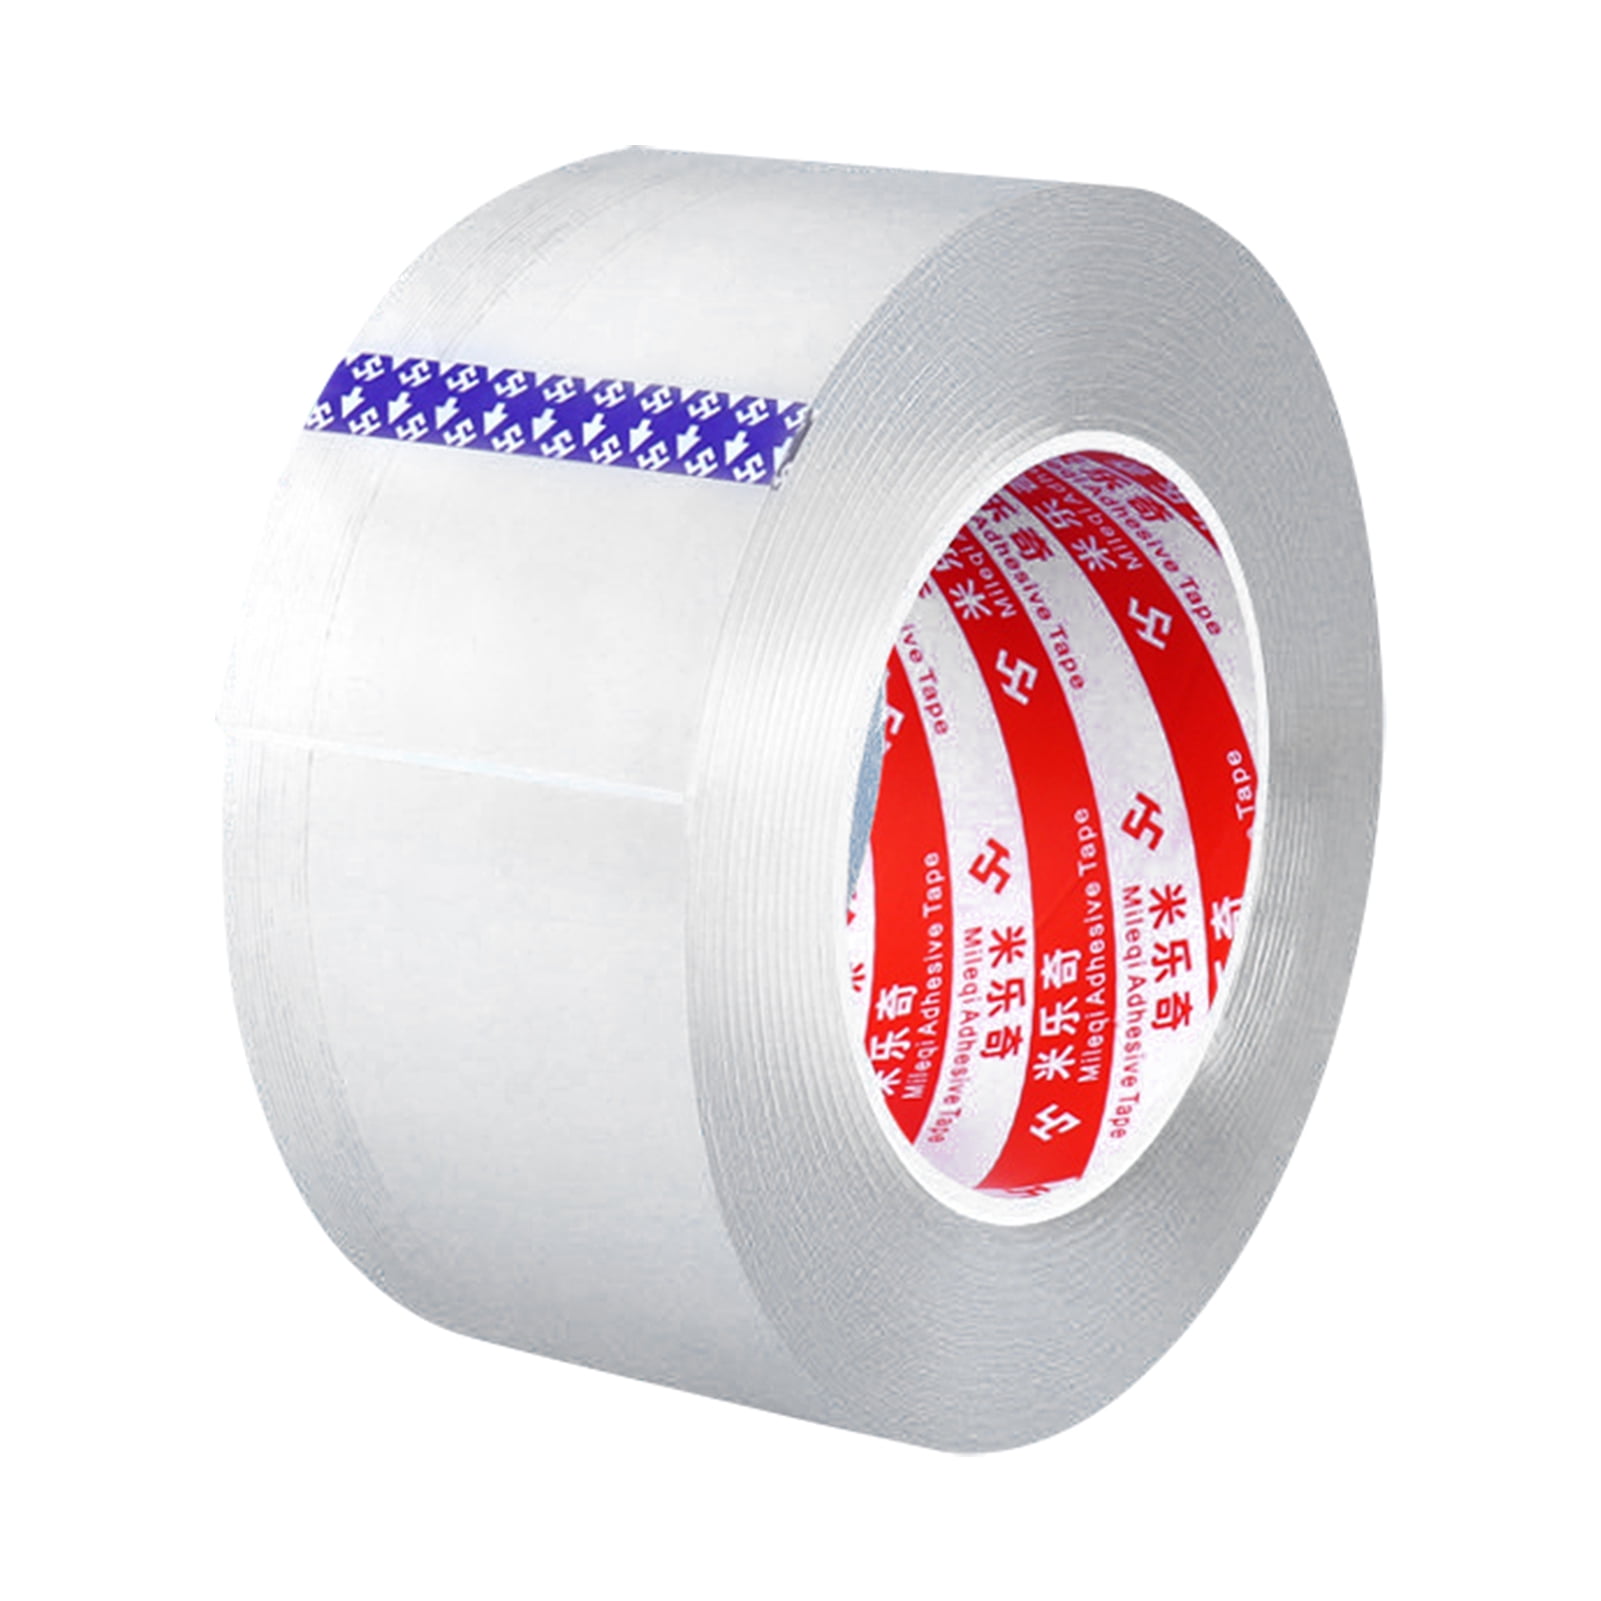 1 Roll Premium Double Sided Tape 50mm 5cm 2" Wide 30 Metres Length most surfaces 